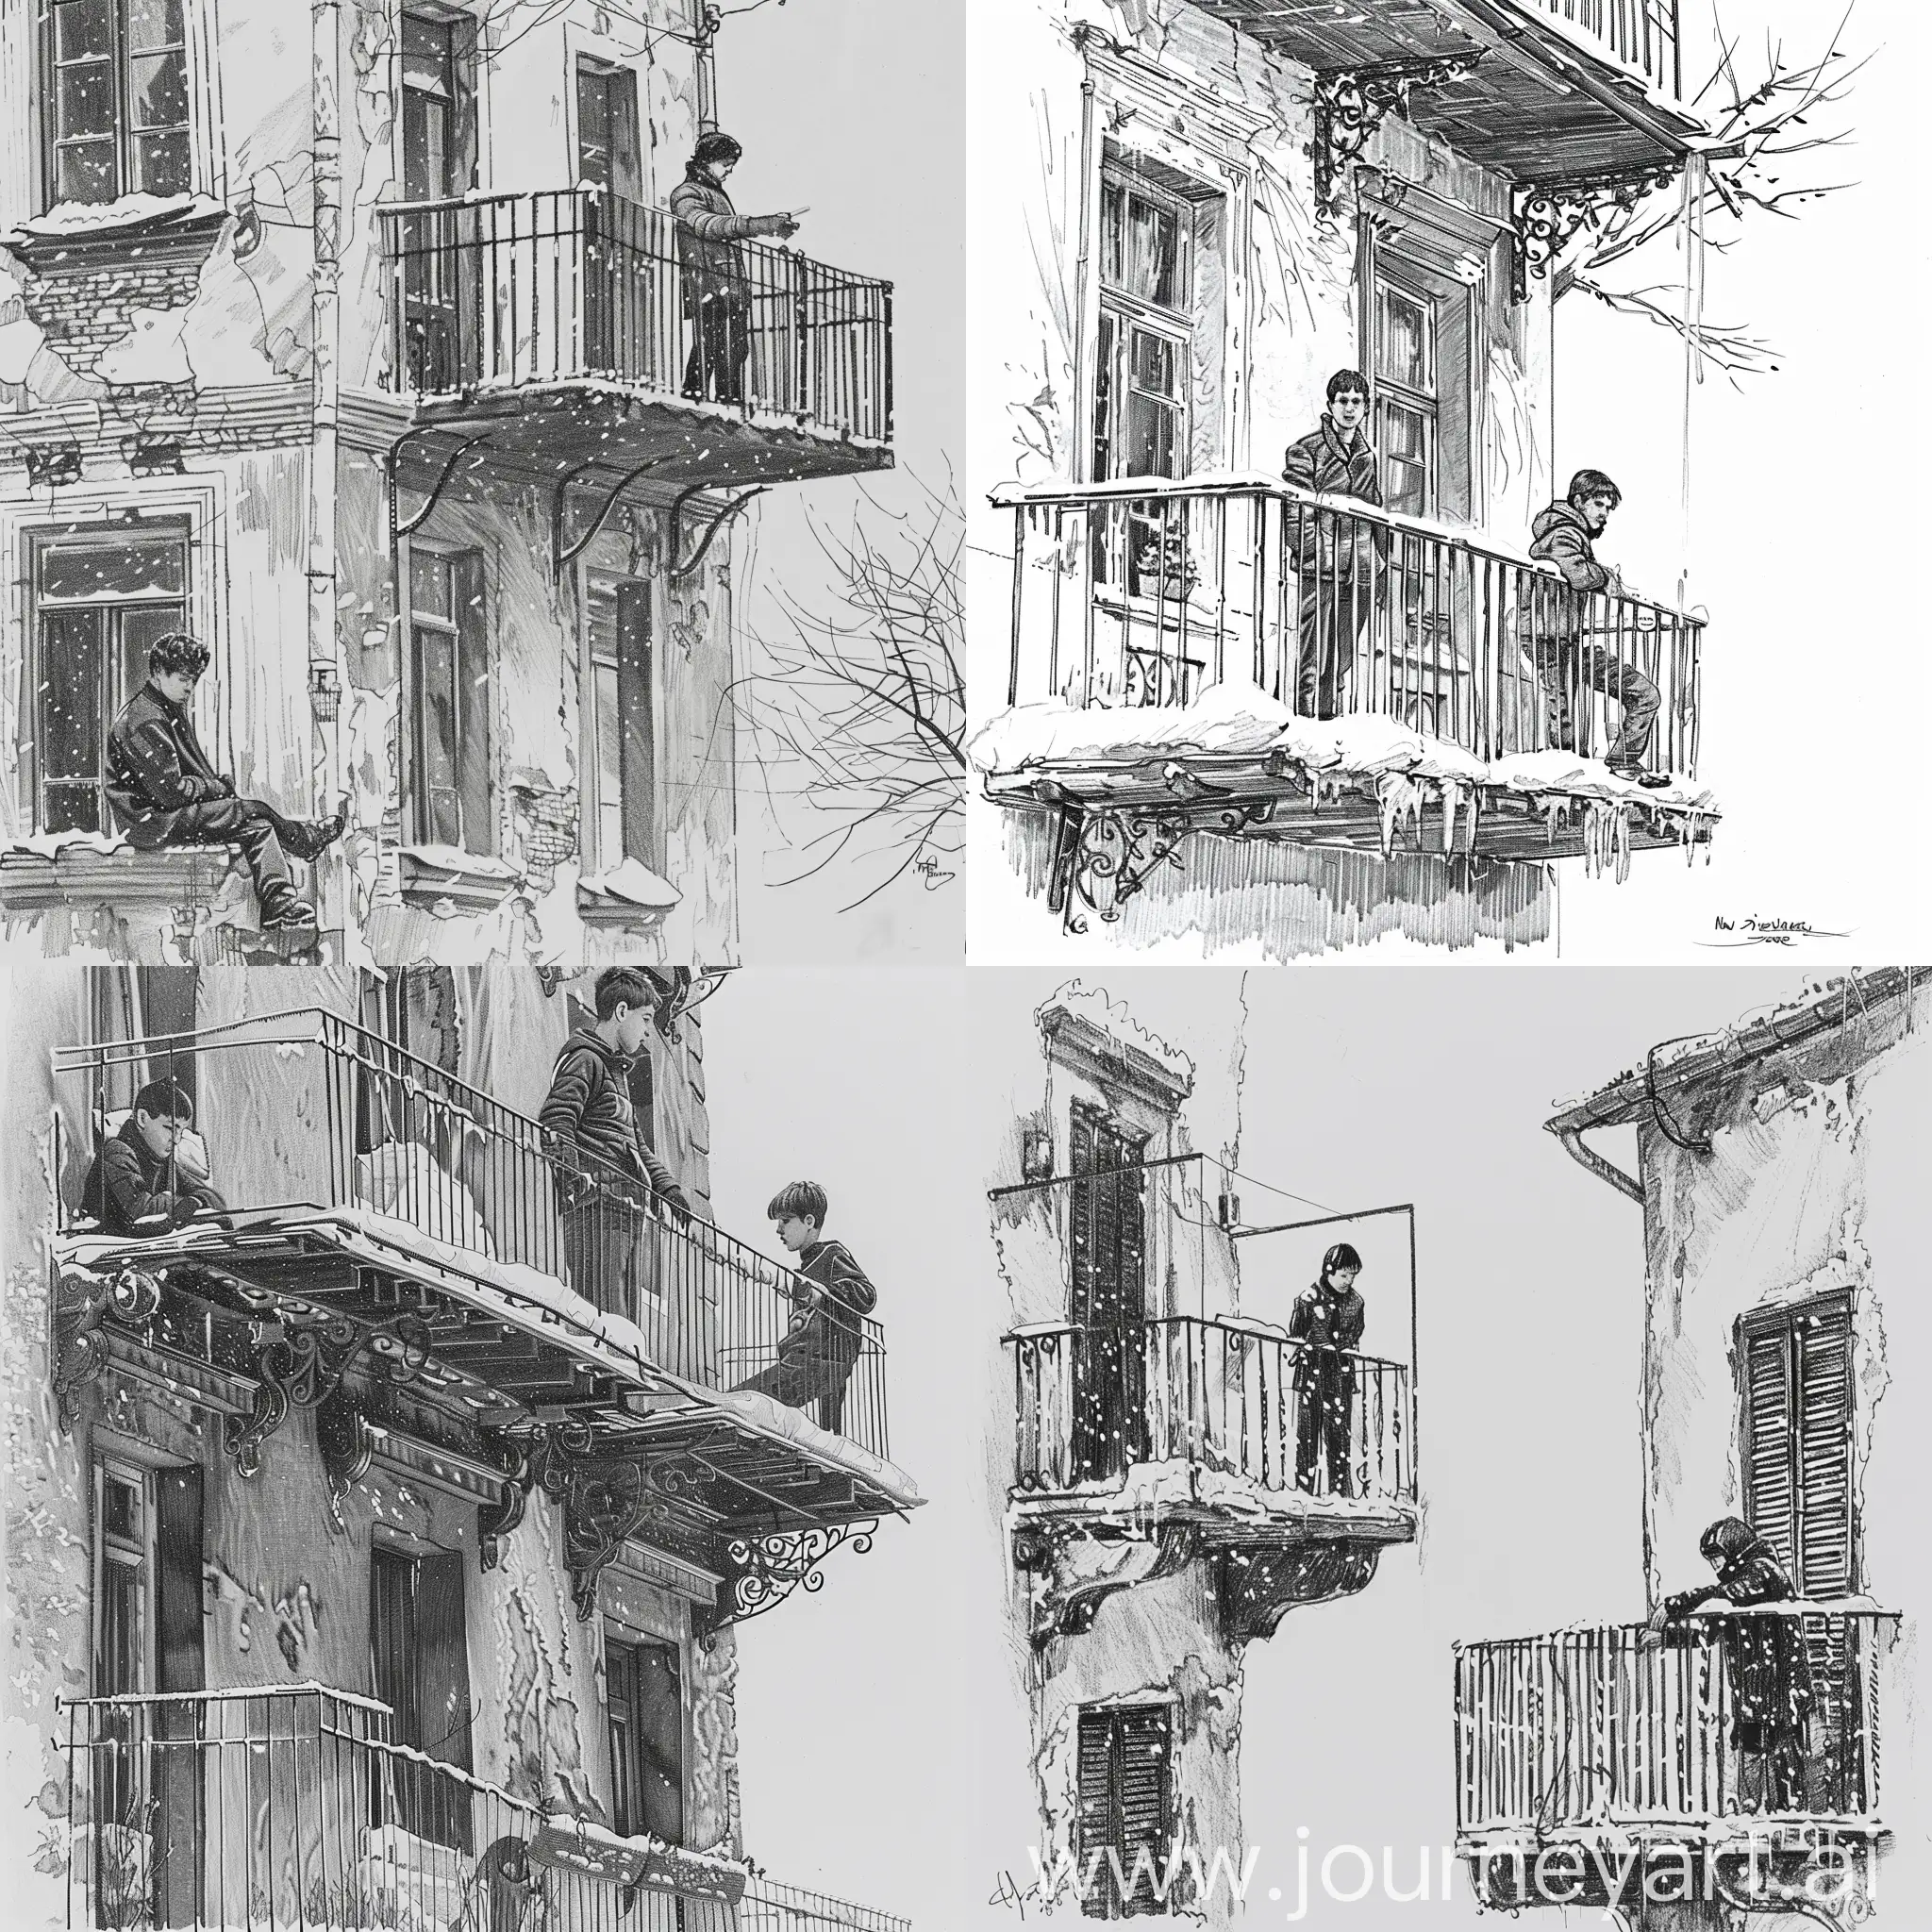 drawing, black/white, winter, snow, new year, holiday, two adjacent balconies, one balcony is old with a metal fence, There is a young man standing on the old balcony, A teenager is sitting on the new balcony